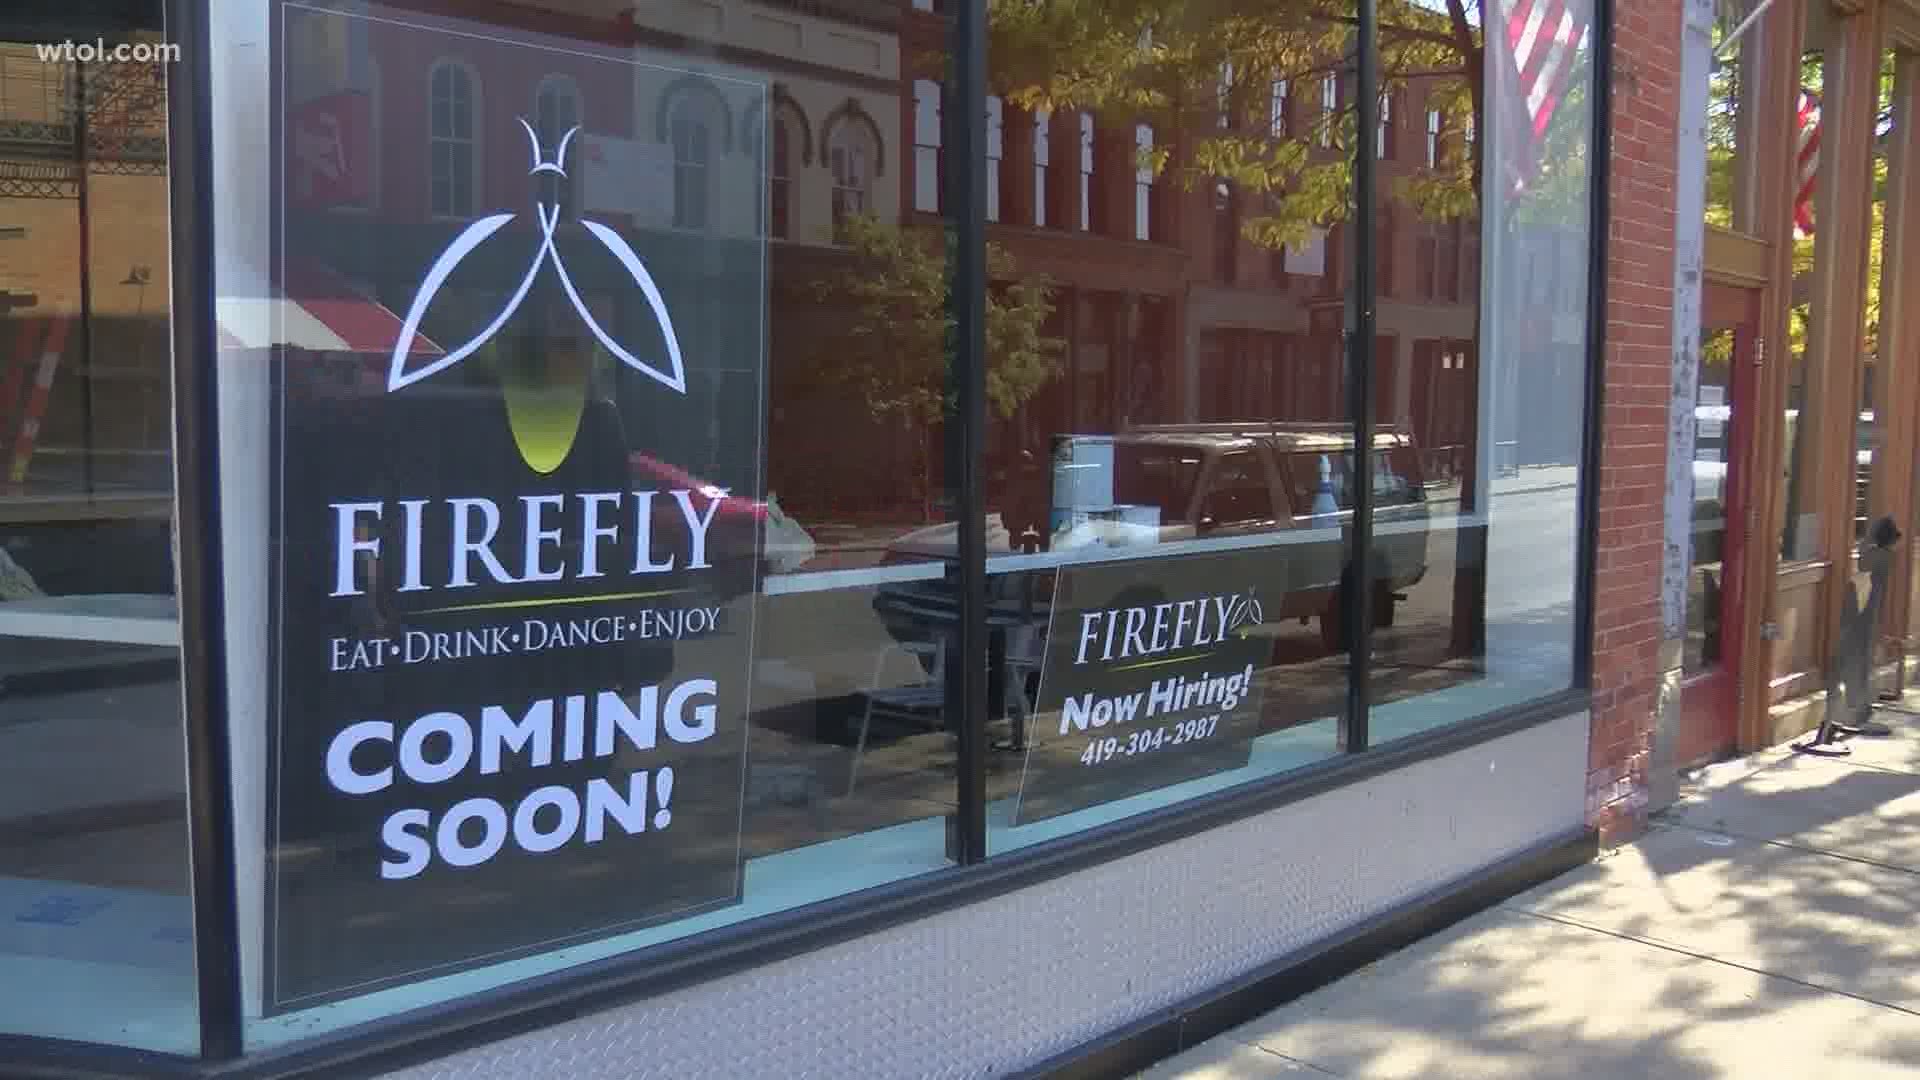 Firefly is set to open in Hensville on Nov. 20. The owners hope the return of the Walleye in January will bring more people back out.